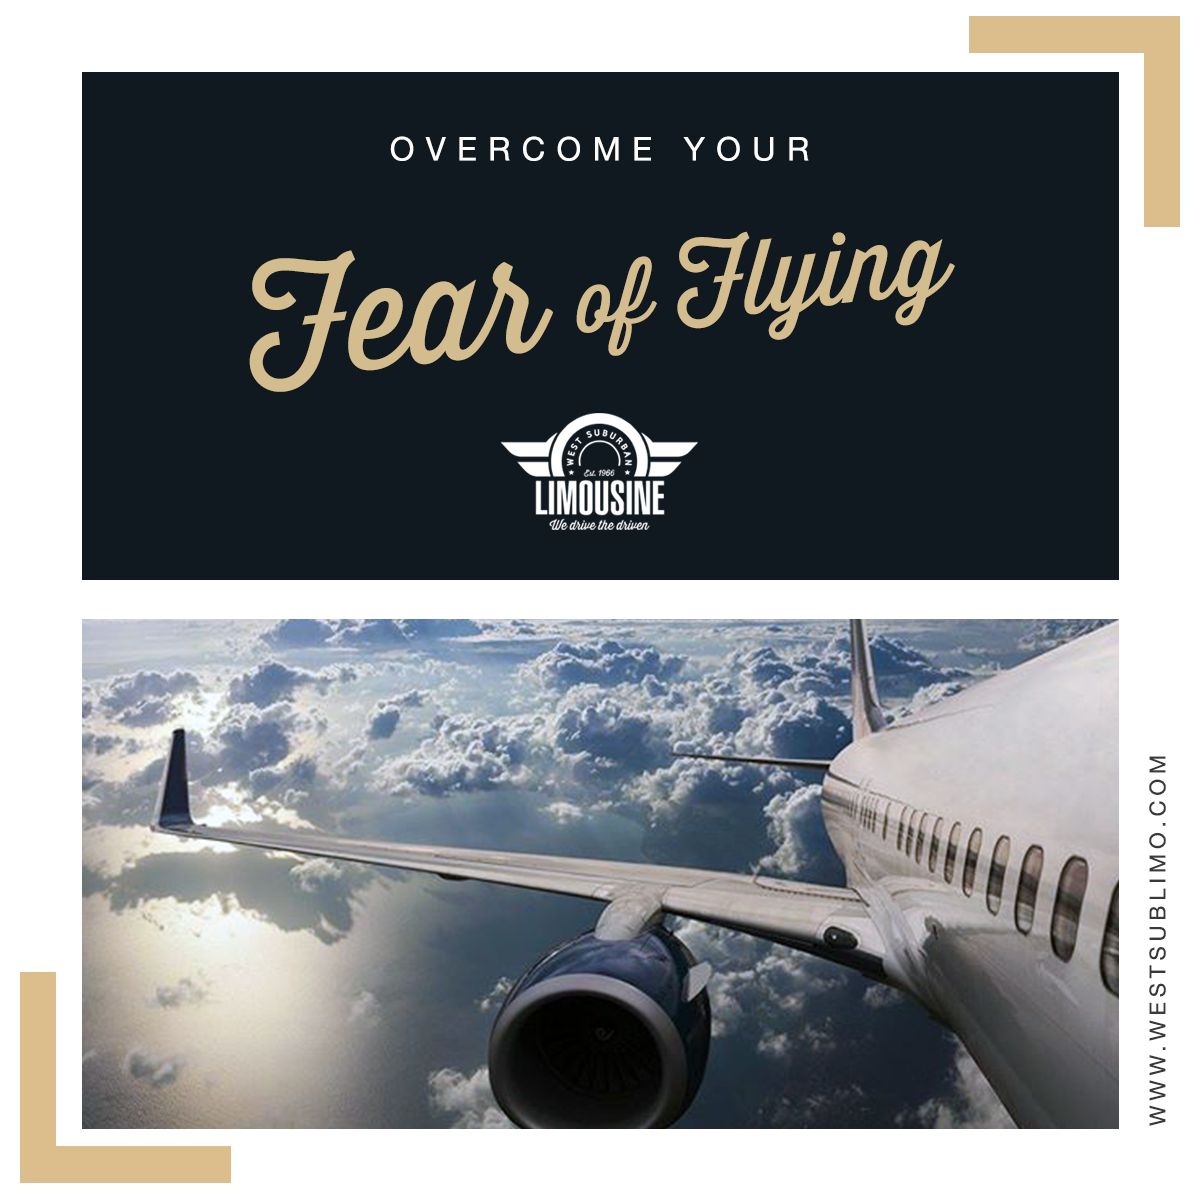 steps on how to overcome your fear of flying